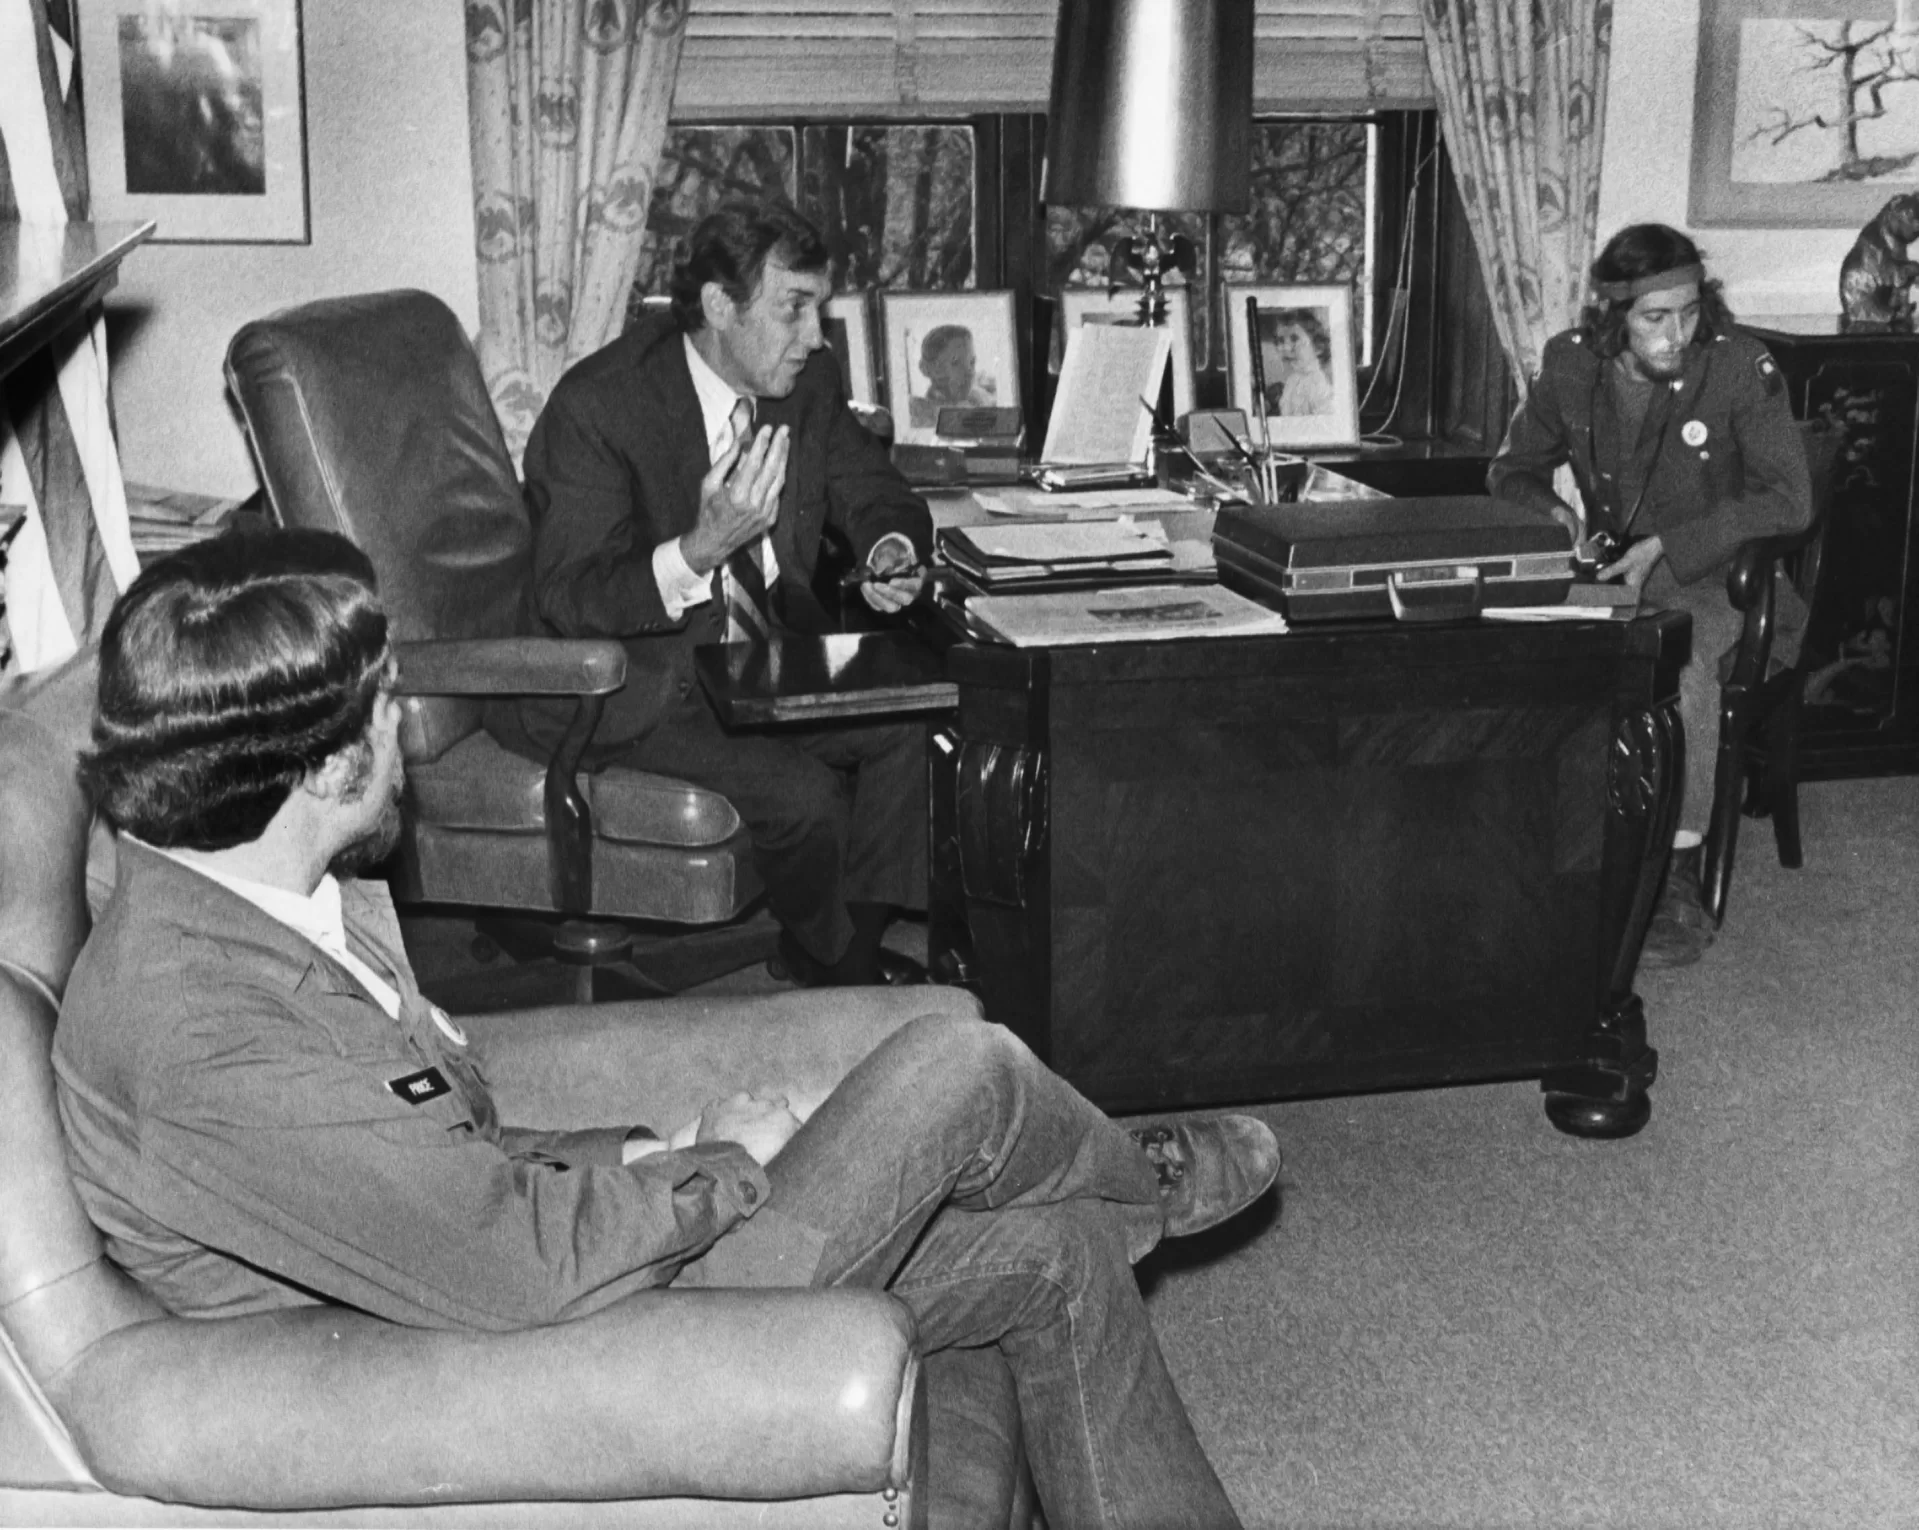 In a quintessential pose and place, Sen. Edmund Muskie '36 sits behind his desk and engages in discussion with Vietnam veterans from Maine on April 22, 1971. (Muskie Archives and Special Collections Library)